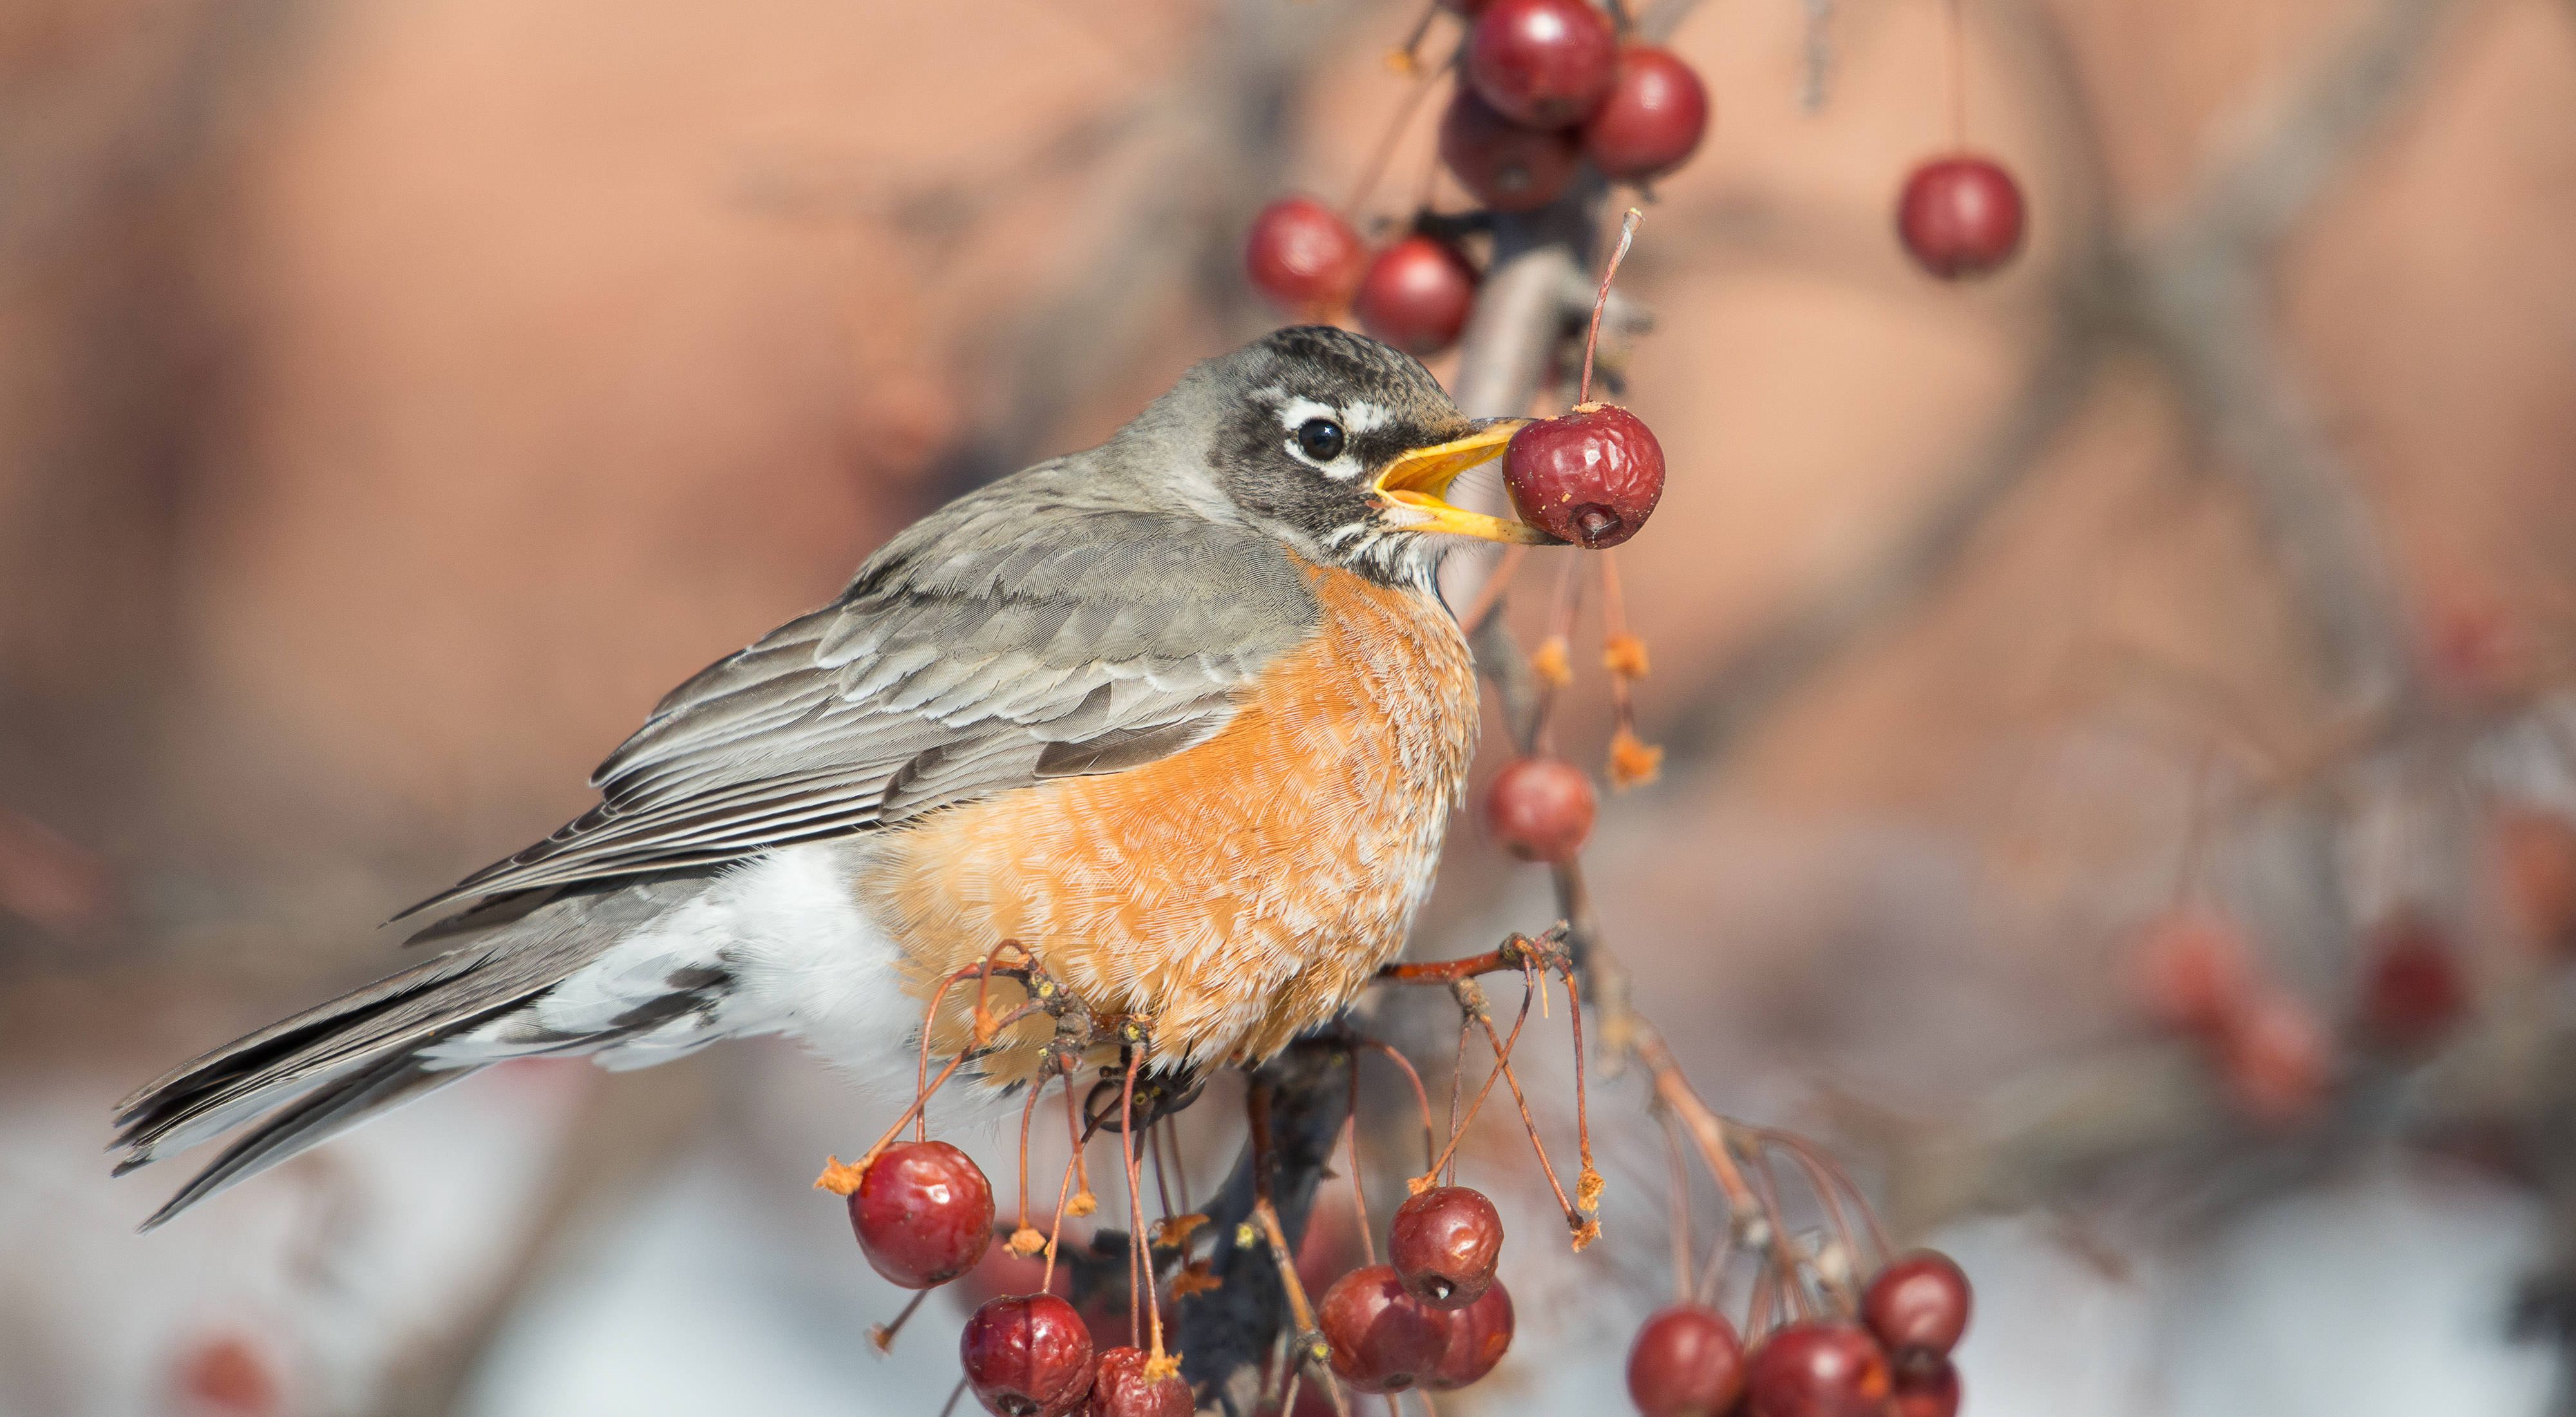 Closeup of an American robin with a small red berry in its beak perched on a thin branch.